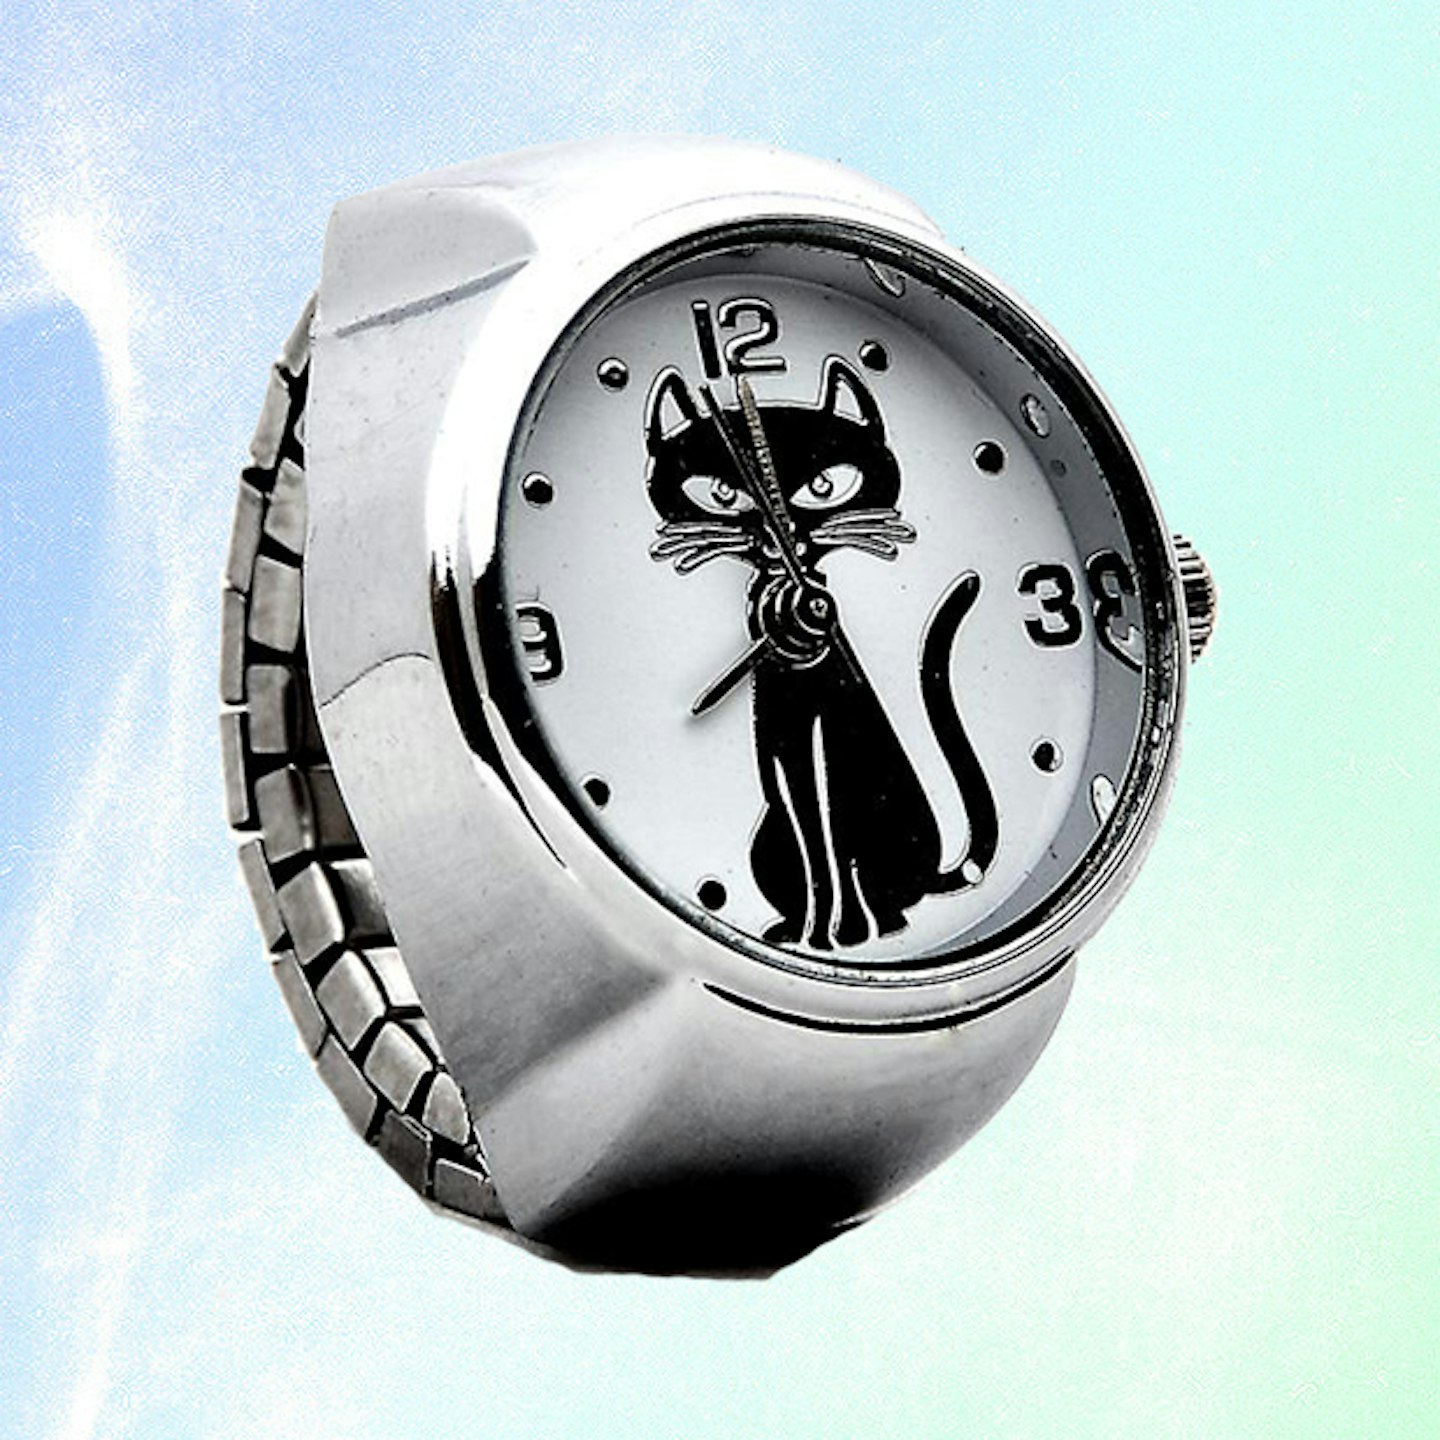 A ring with a watch on it